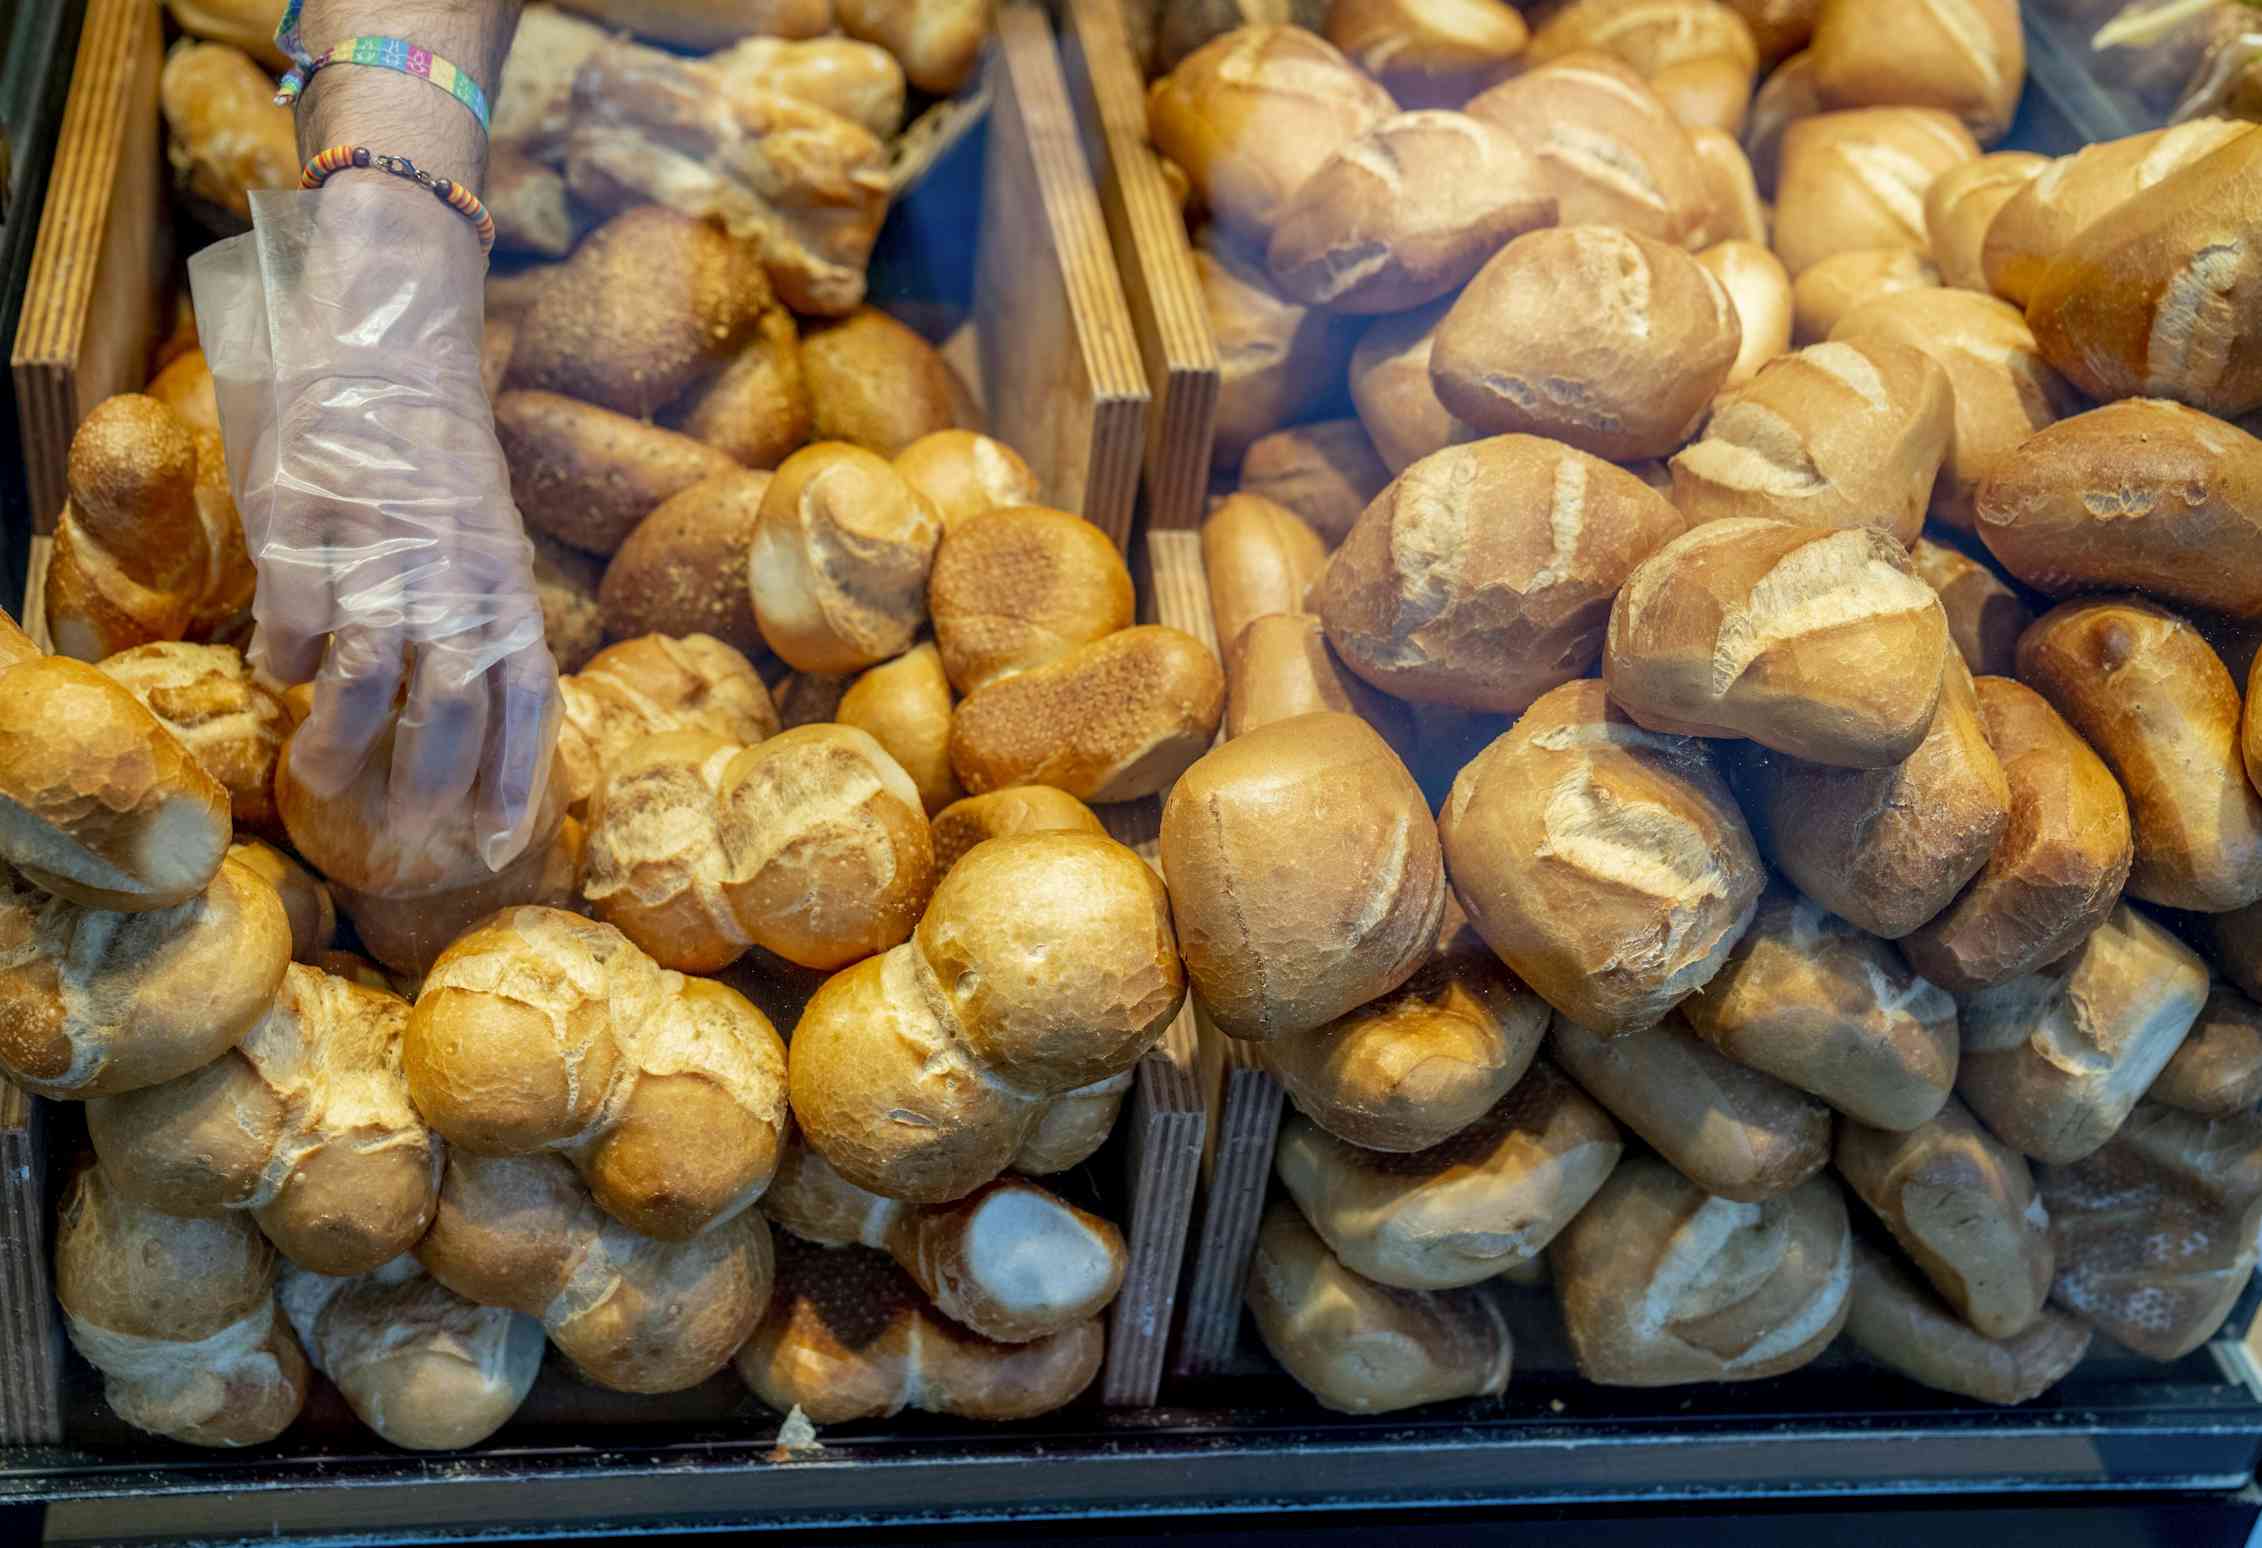 A gloved hand reaches into a bakery display case to pick up a bread bun from a pile